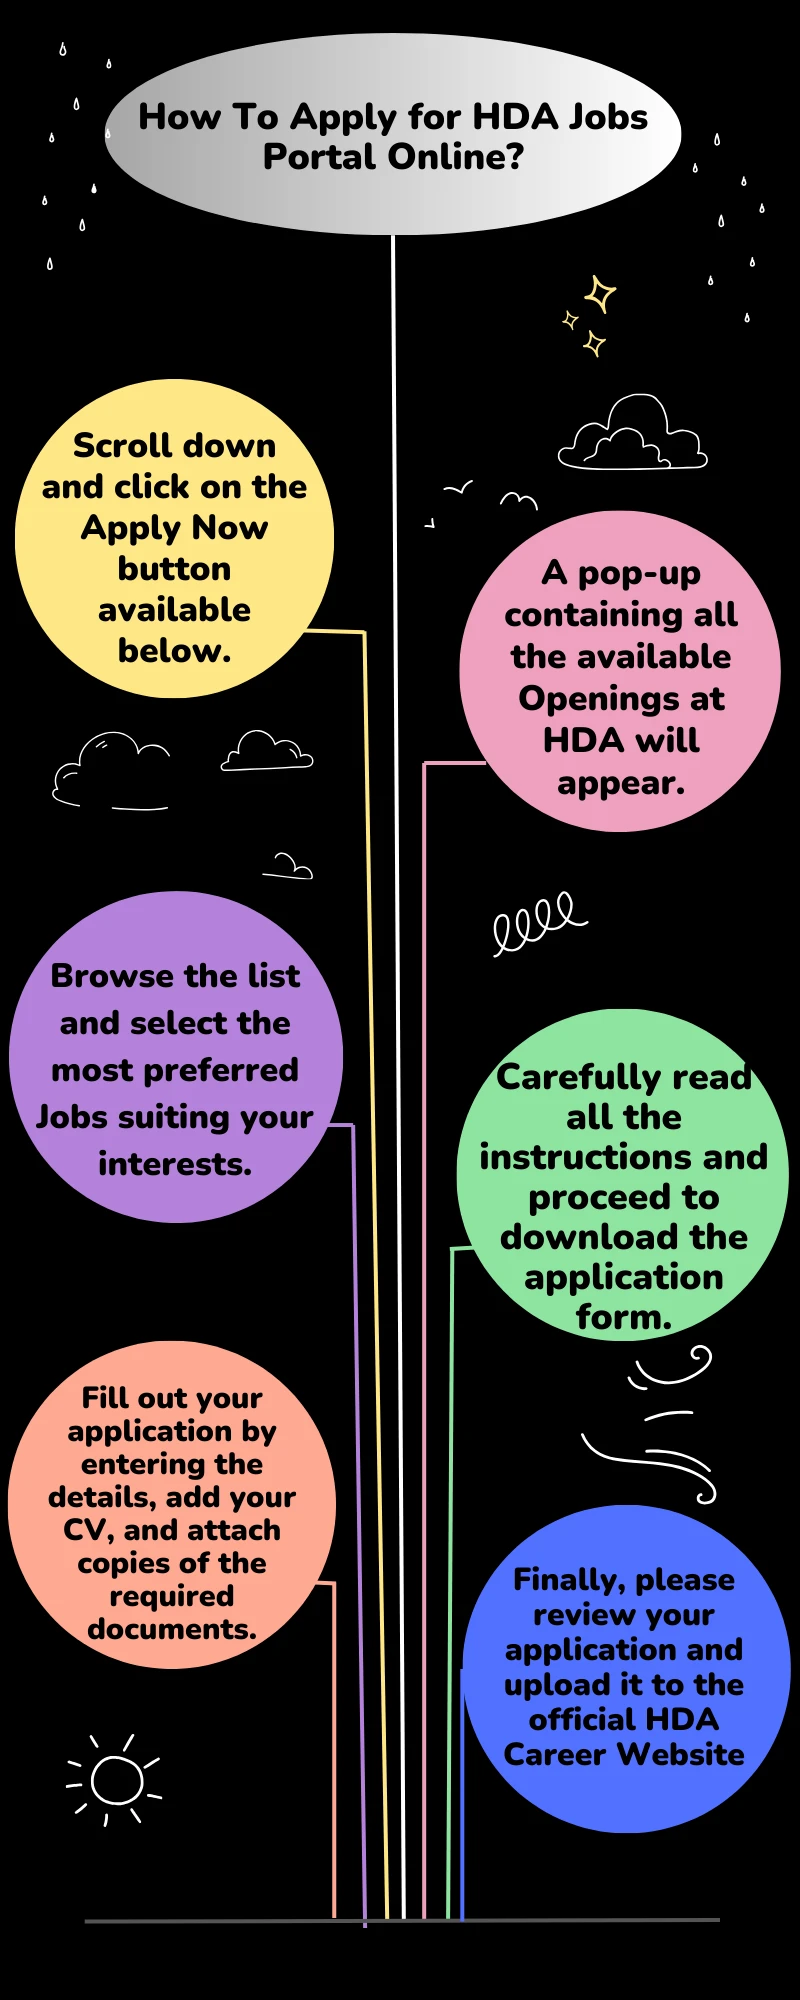 How To Apply for HDA Jobs Portal Online?